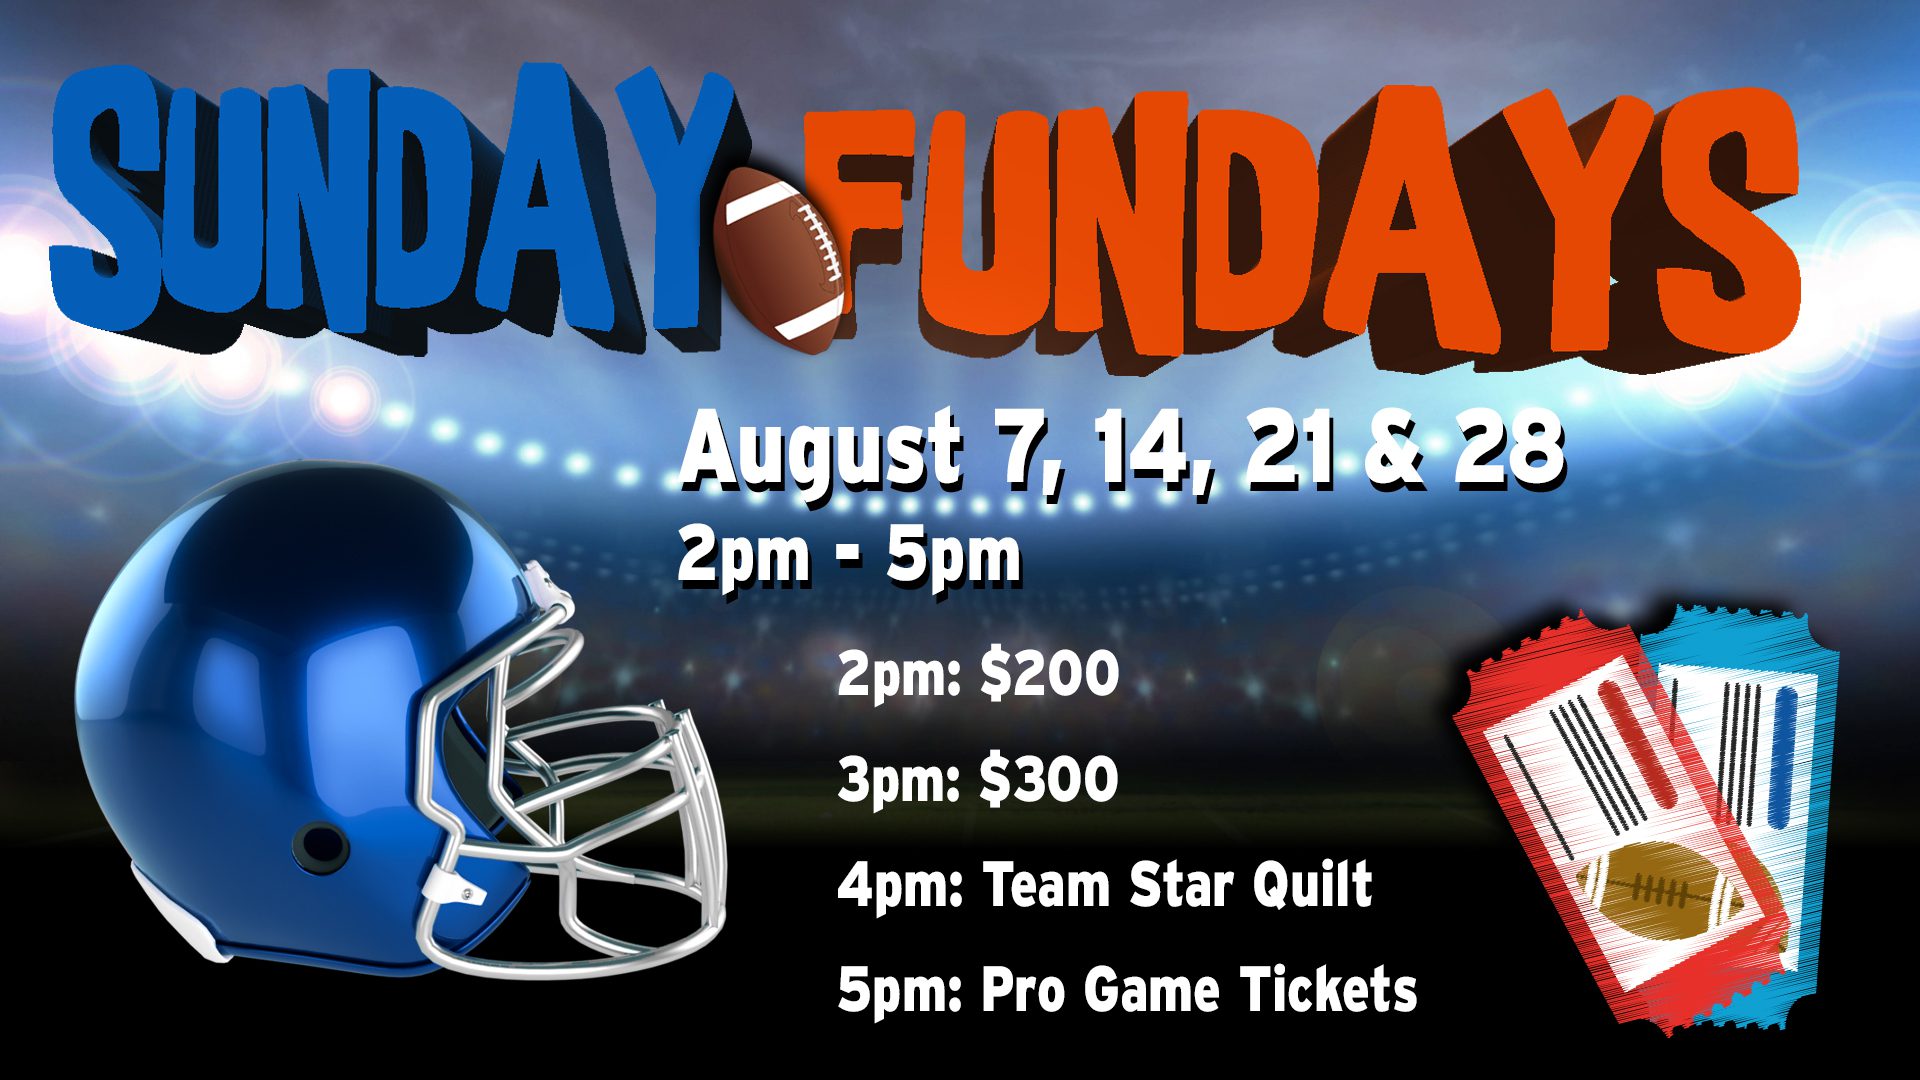 Promotional image for "sunday fundays" featuring football-themed events and prizes with schedule and costs.